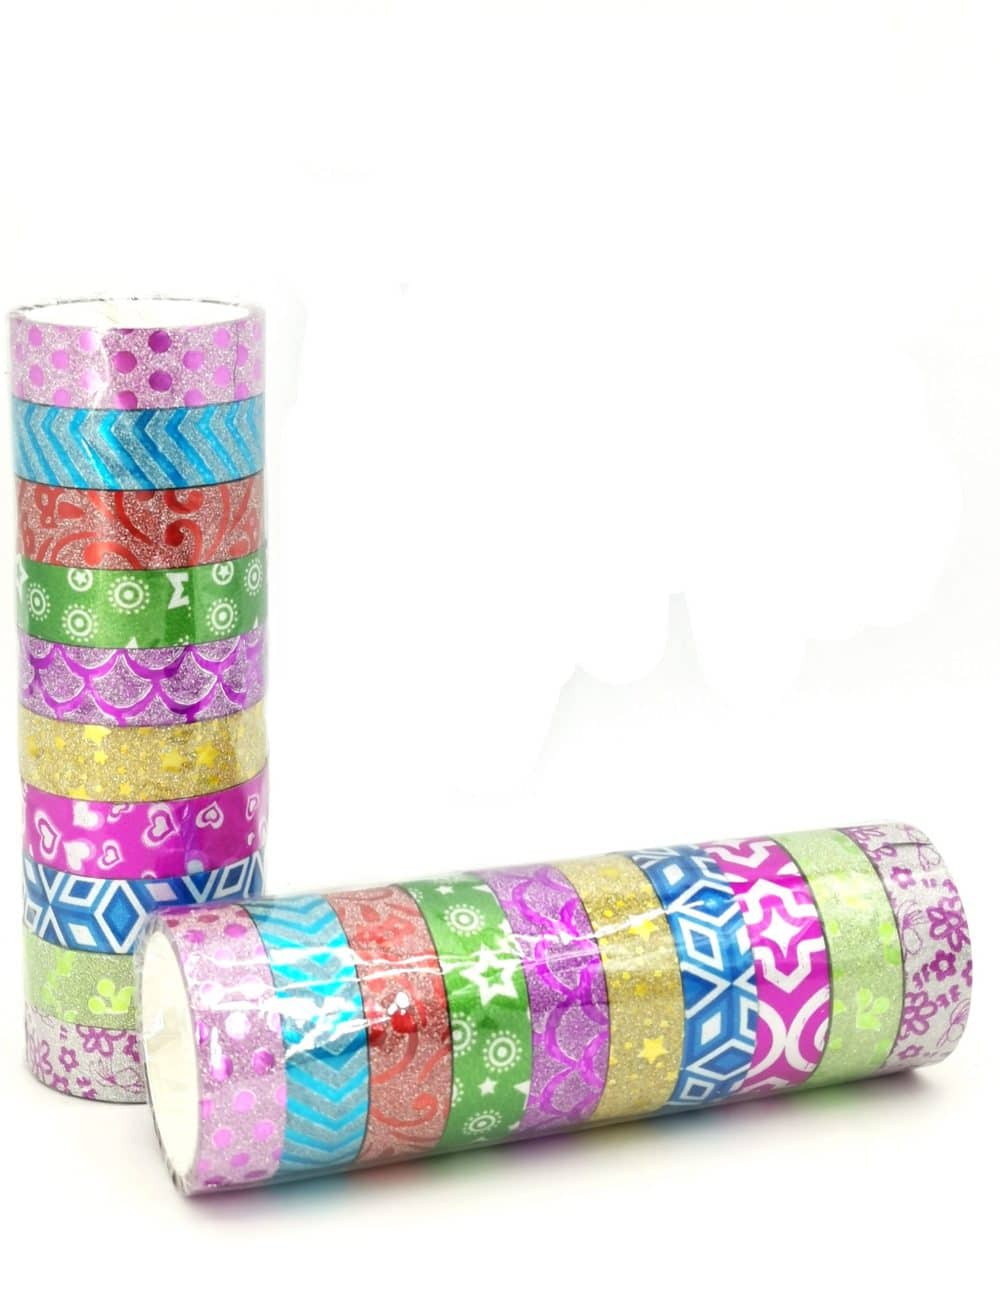 TAPE 19L252D 5M 2.8 scaled 1 Decorating Sparkling Glitter Tape With Design 10Pcs/Pack